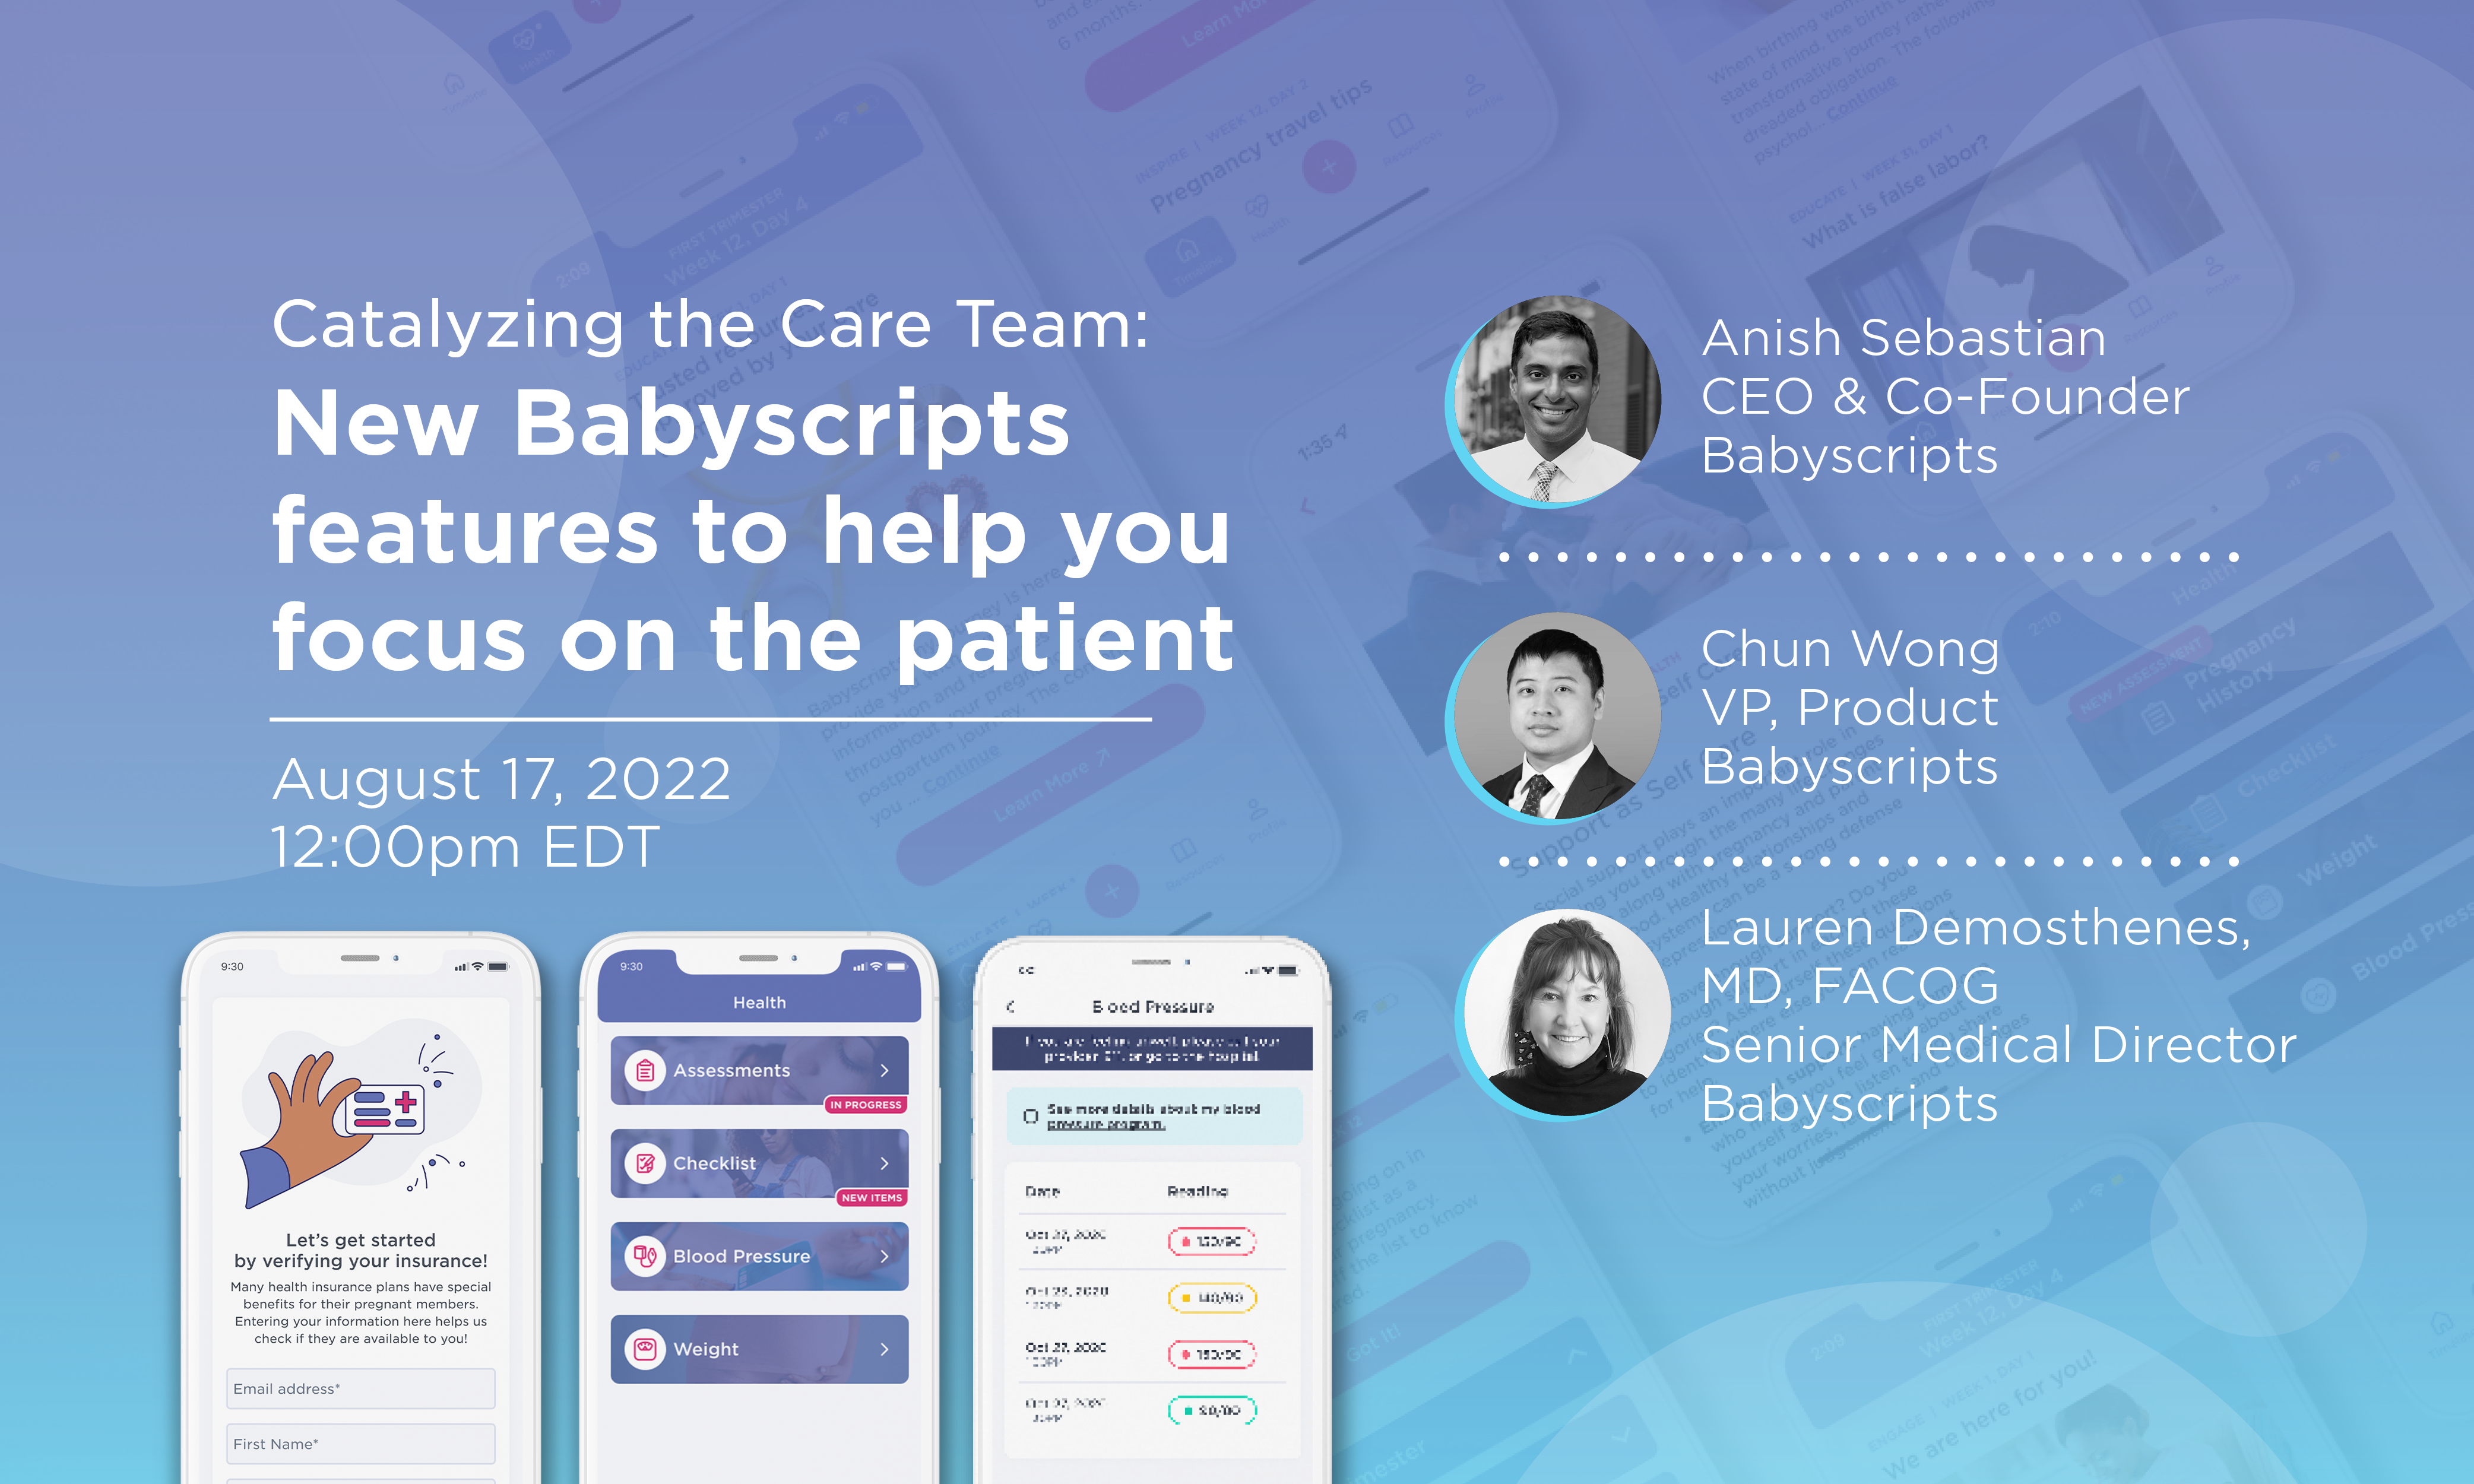 Q3 2022 Webinar- Catalyzing the Care Team- New Babyscripts features to help you focus on the patient